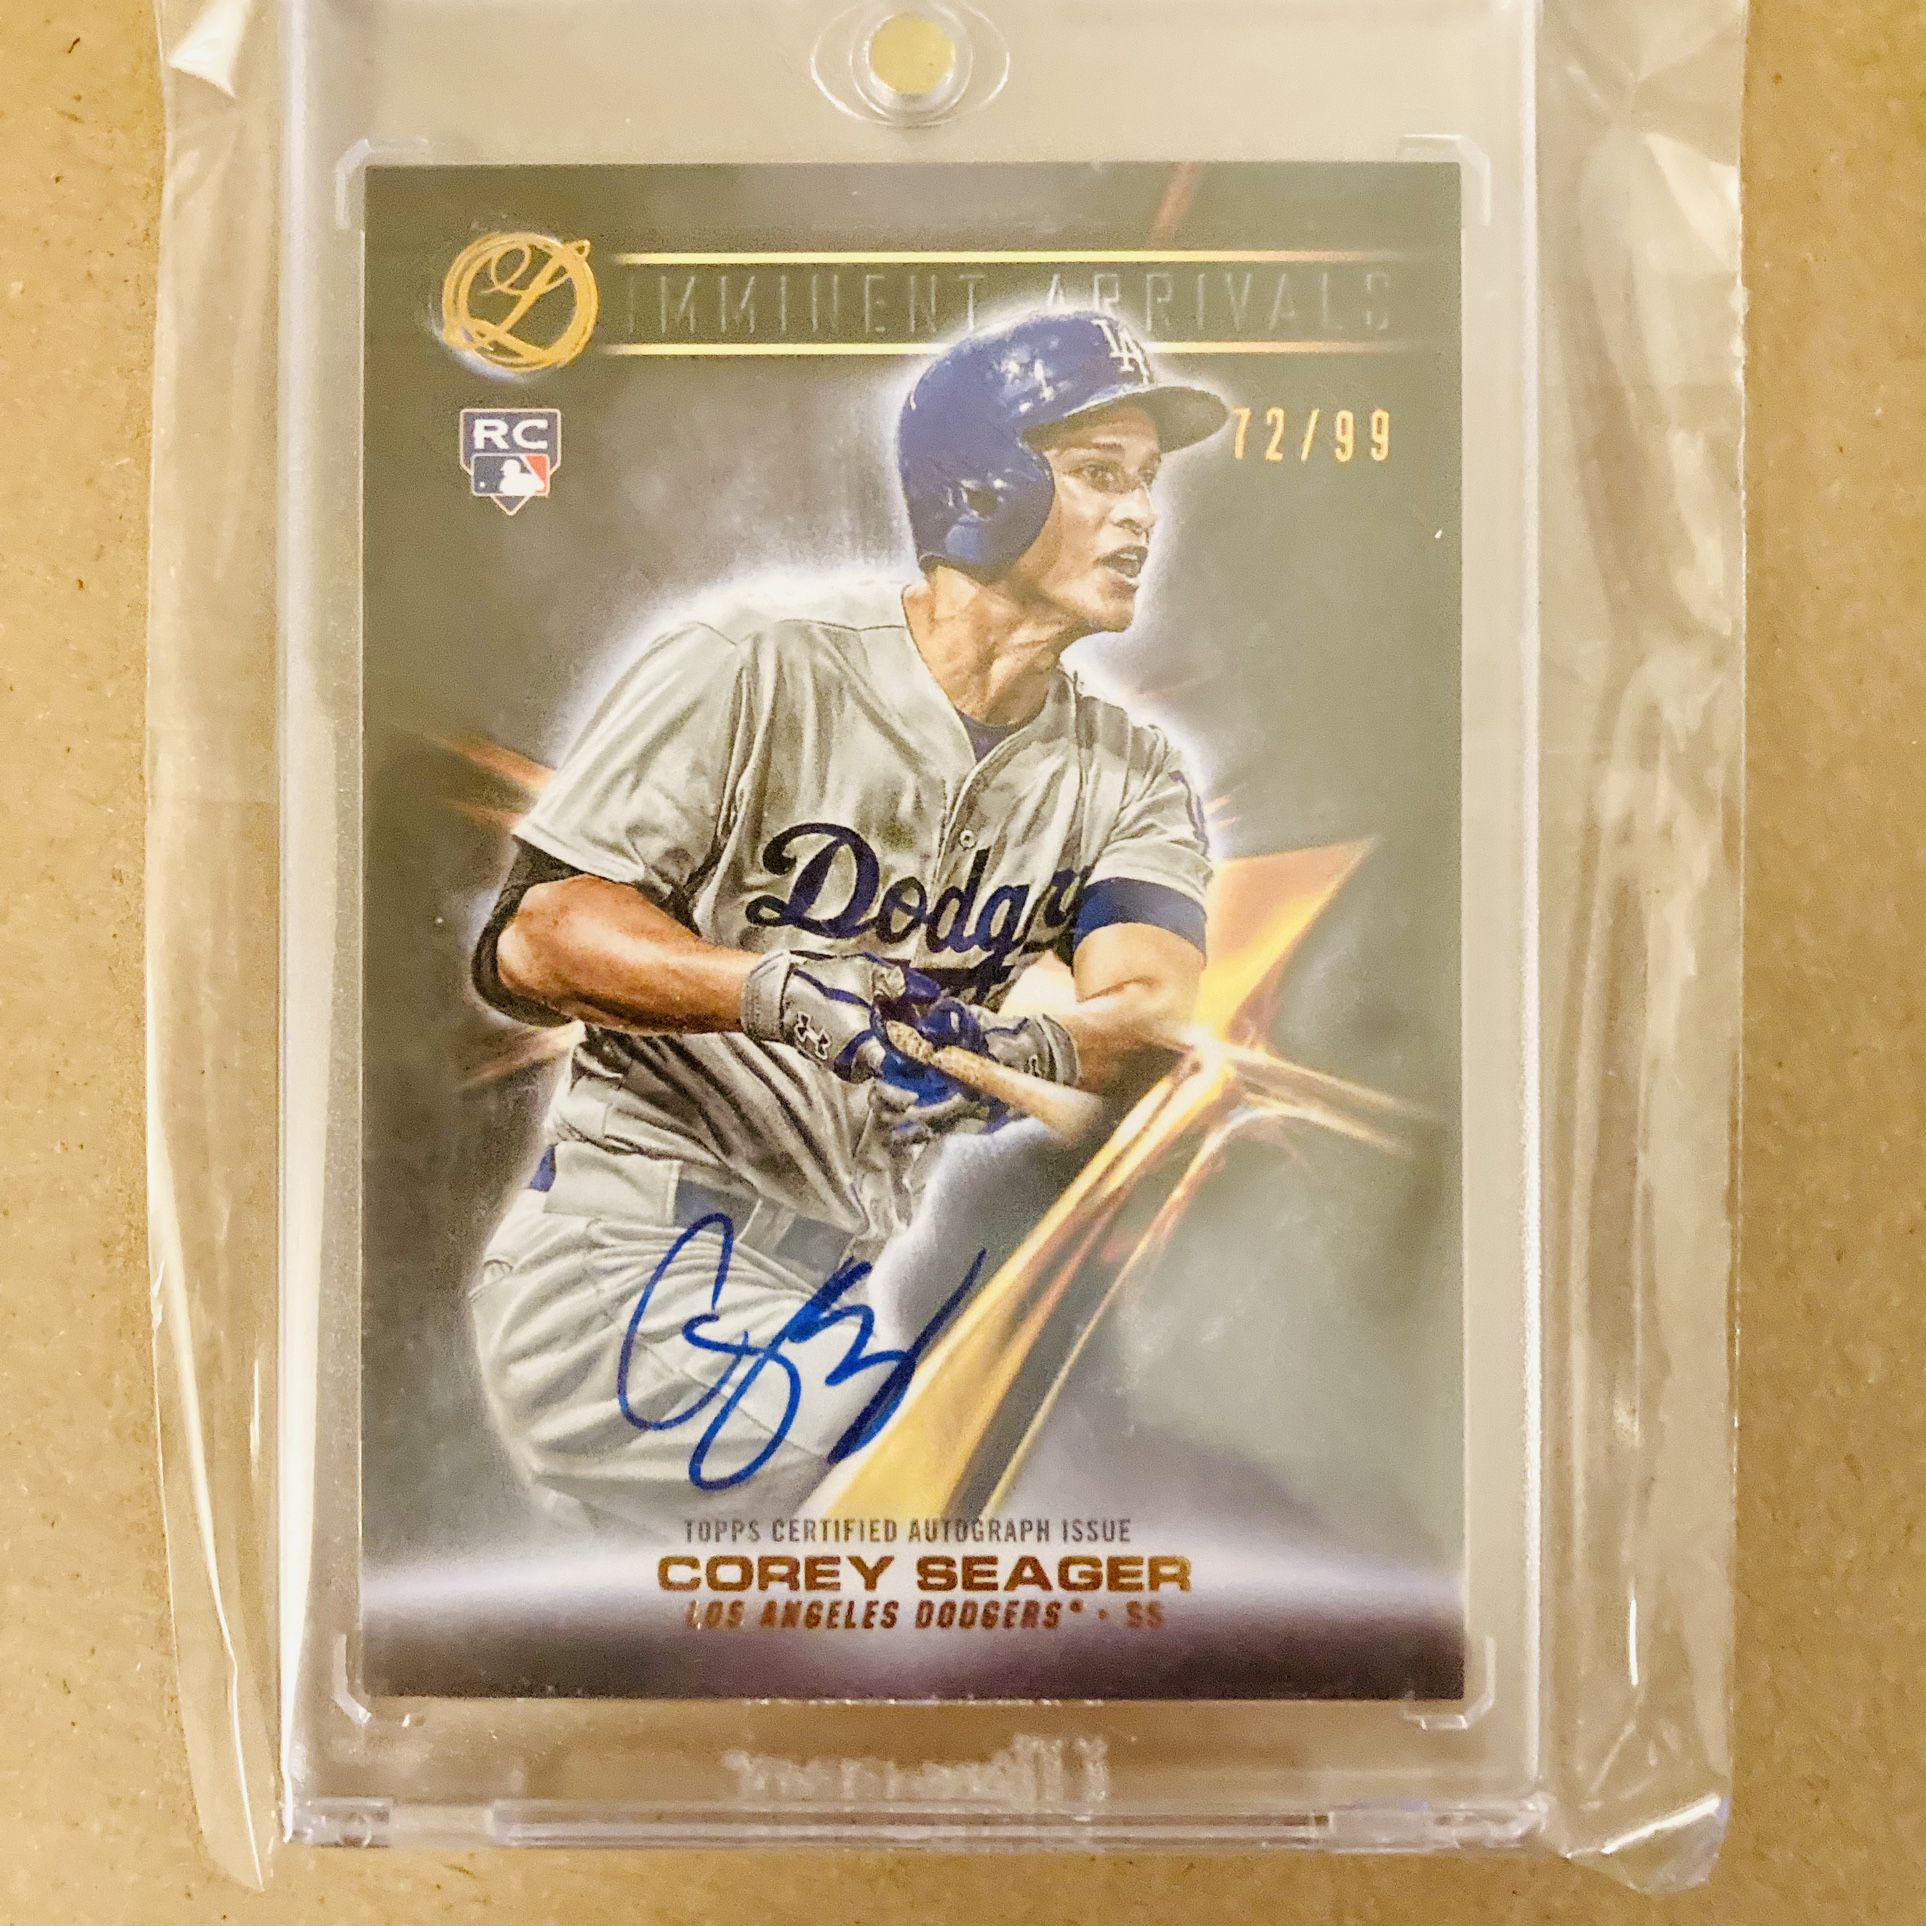 Corey Seager Signed ROOKIE Card